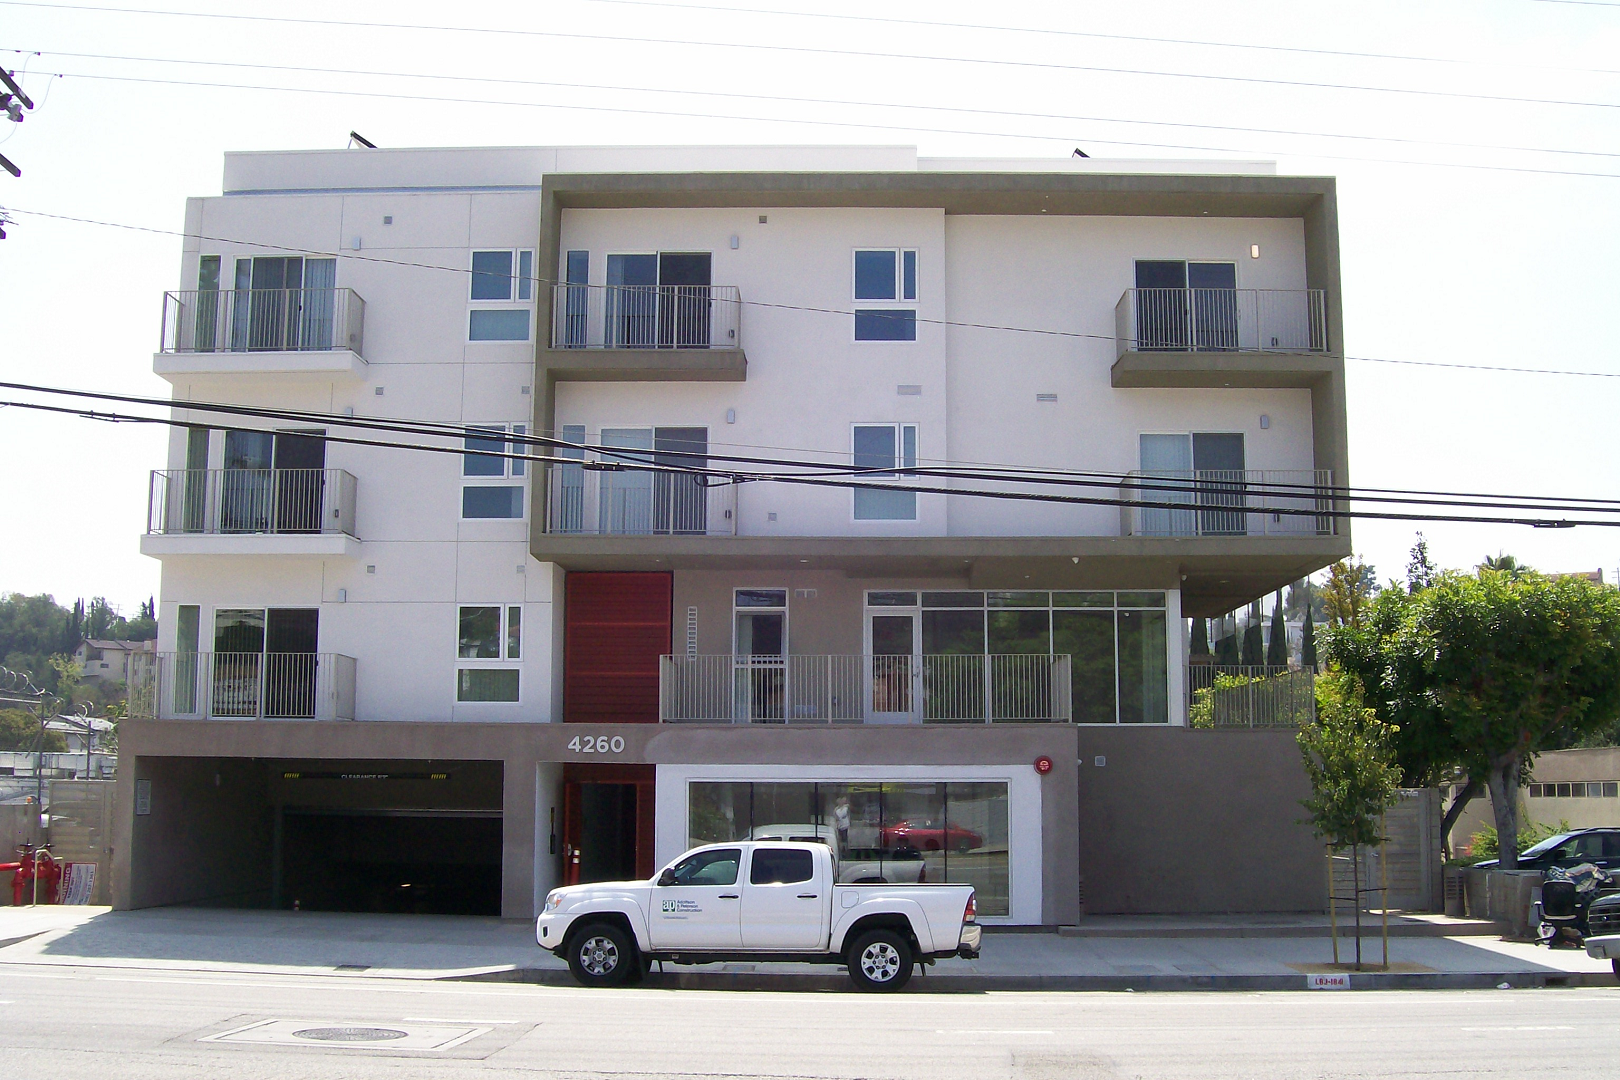 front street view of four story building. Underground parking lor and street parking. Units with balcony access.